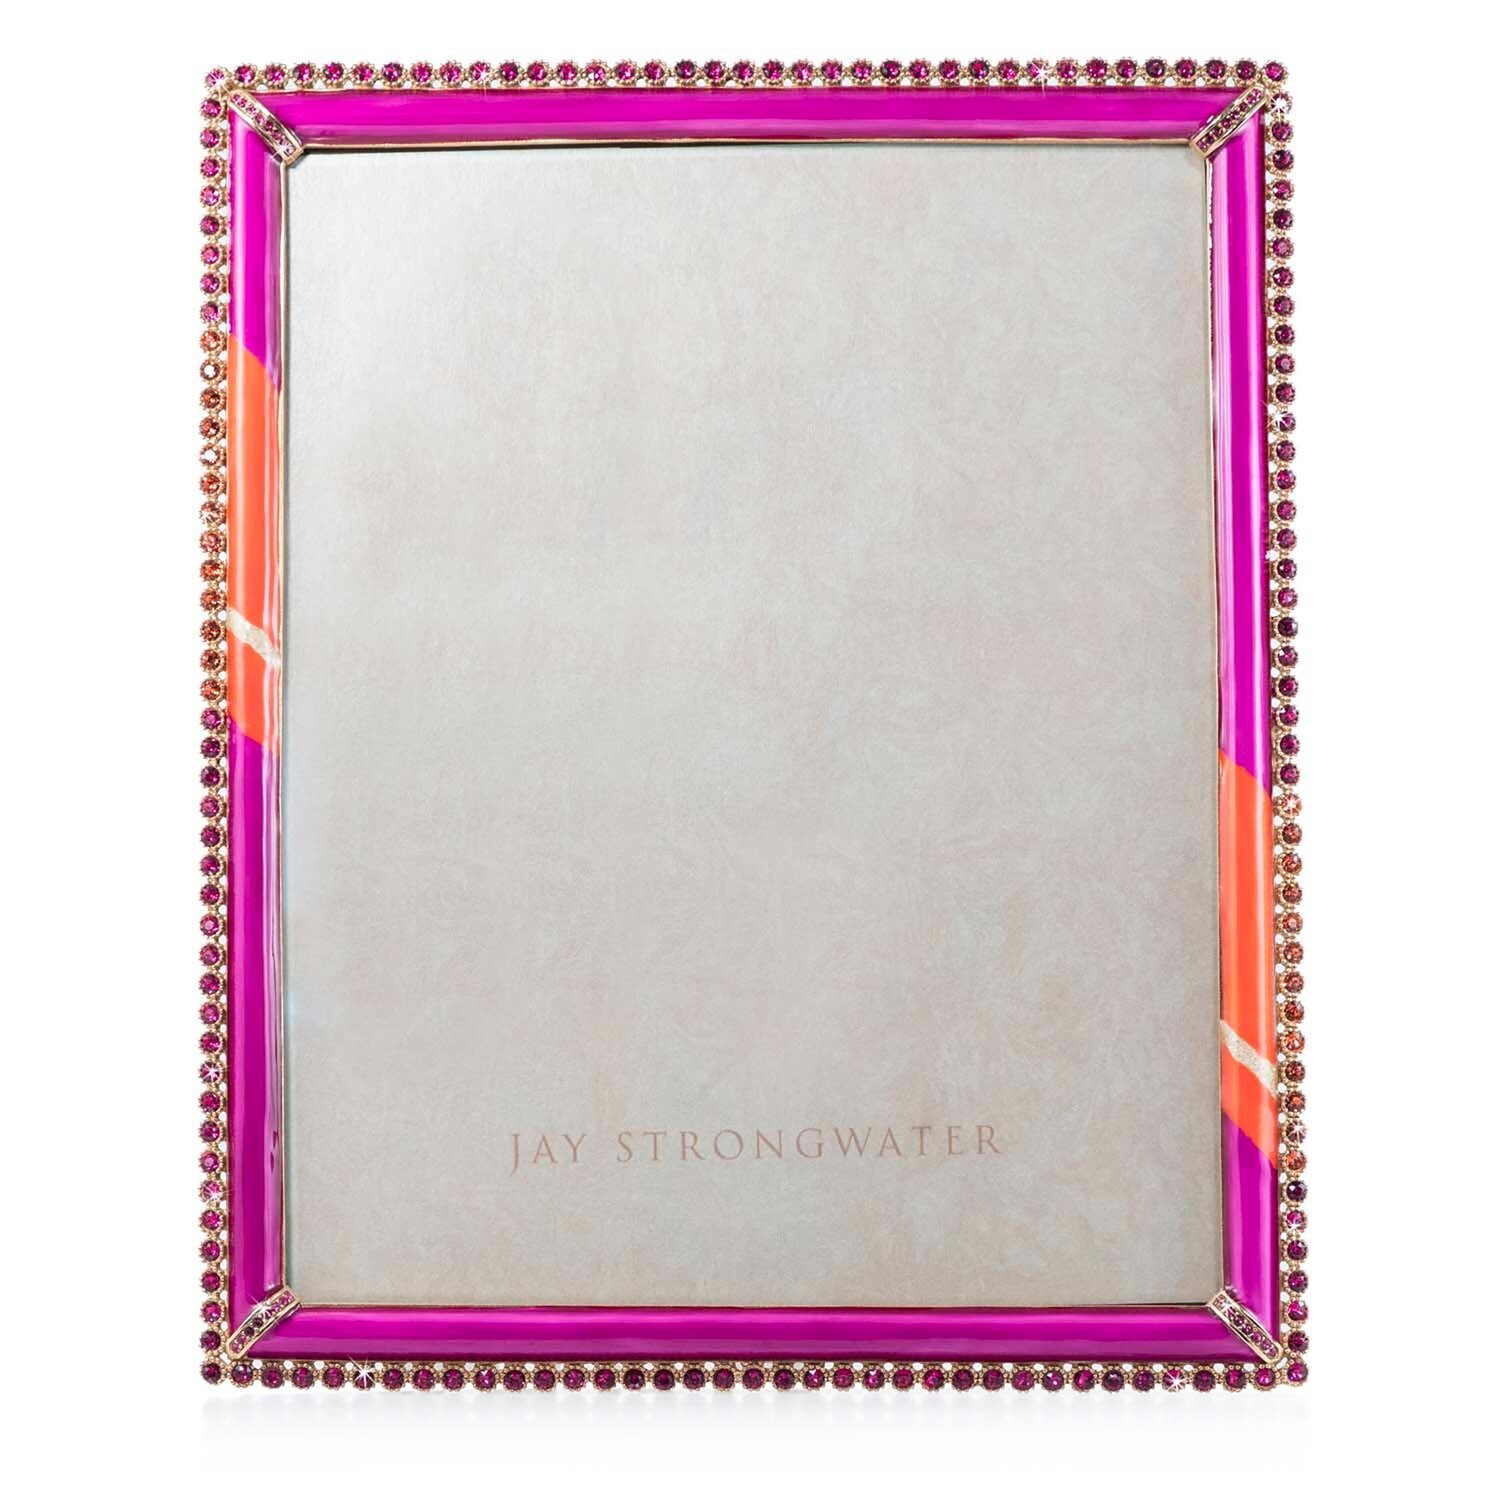 Jay Strongwater Laetitia Stone Edge 8 x 10 Inch Picture Frame SPF5512-202